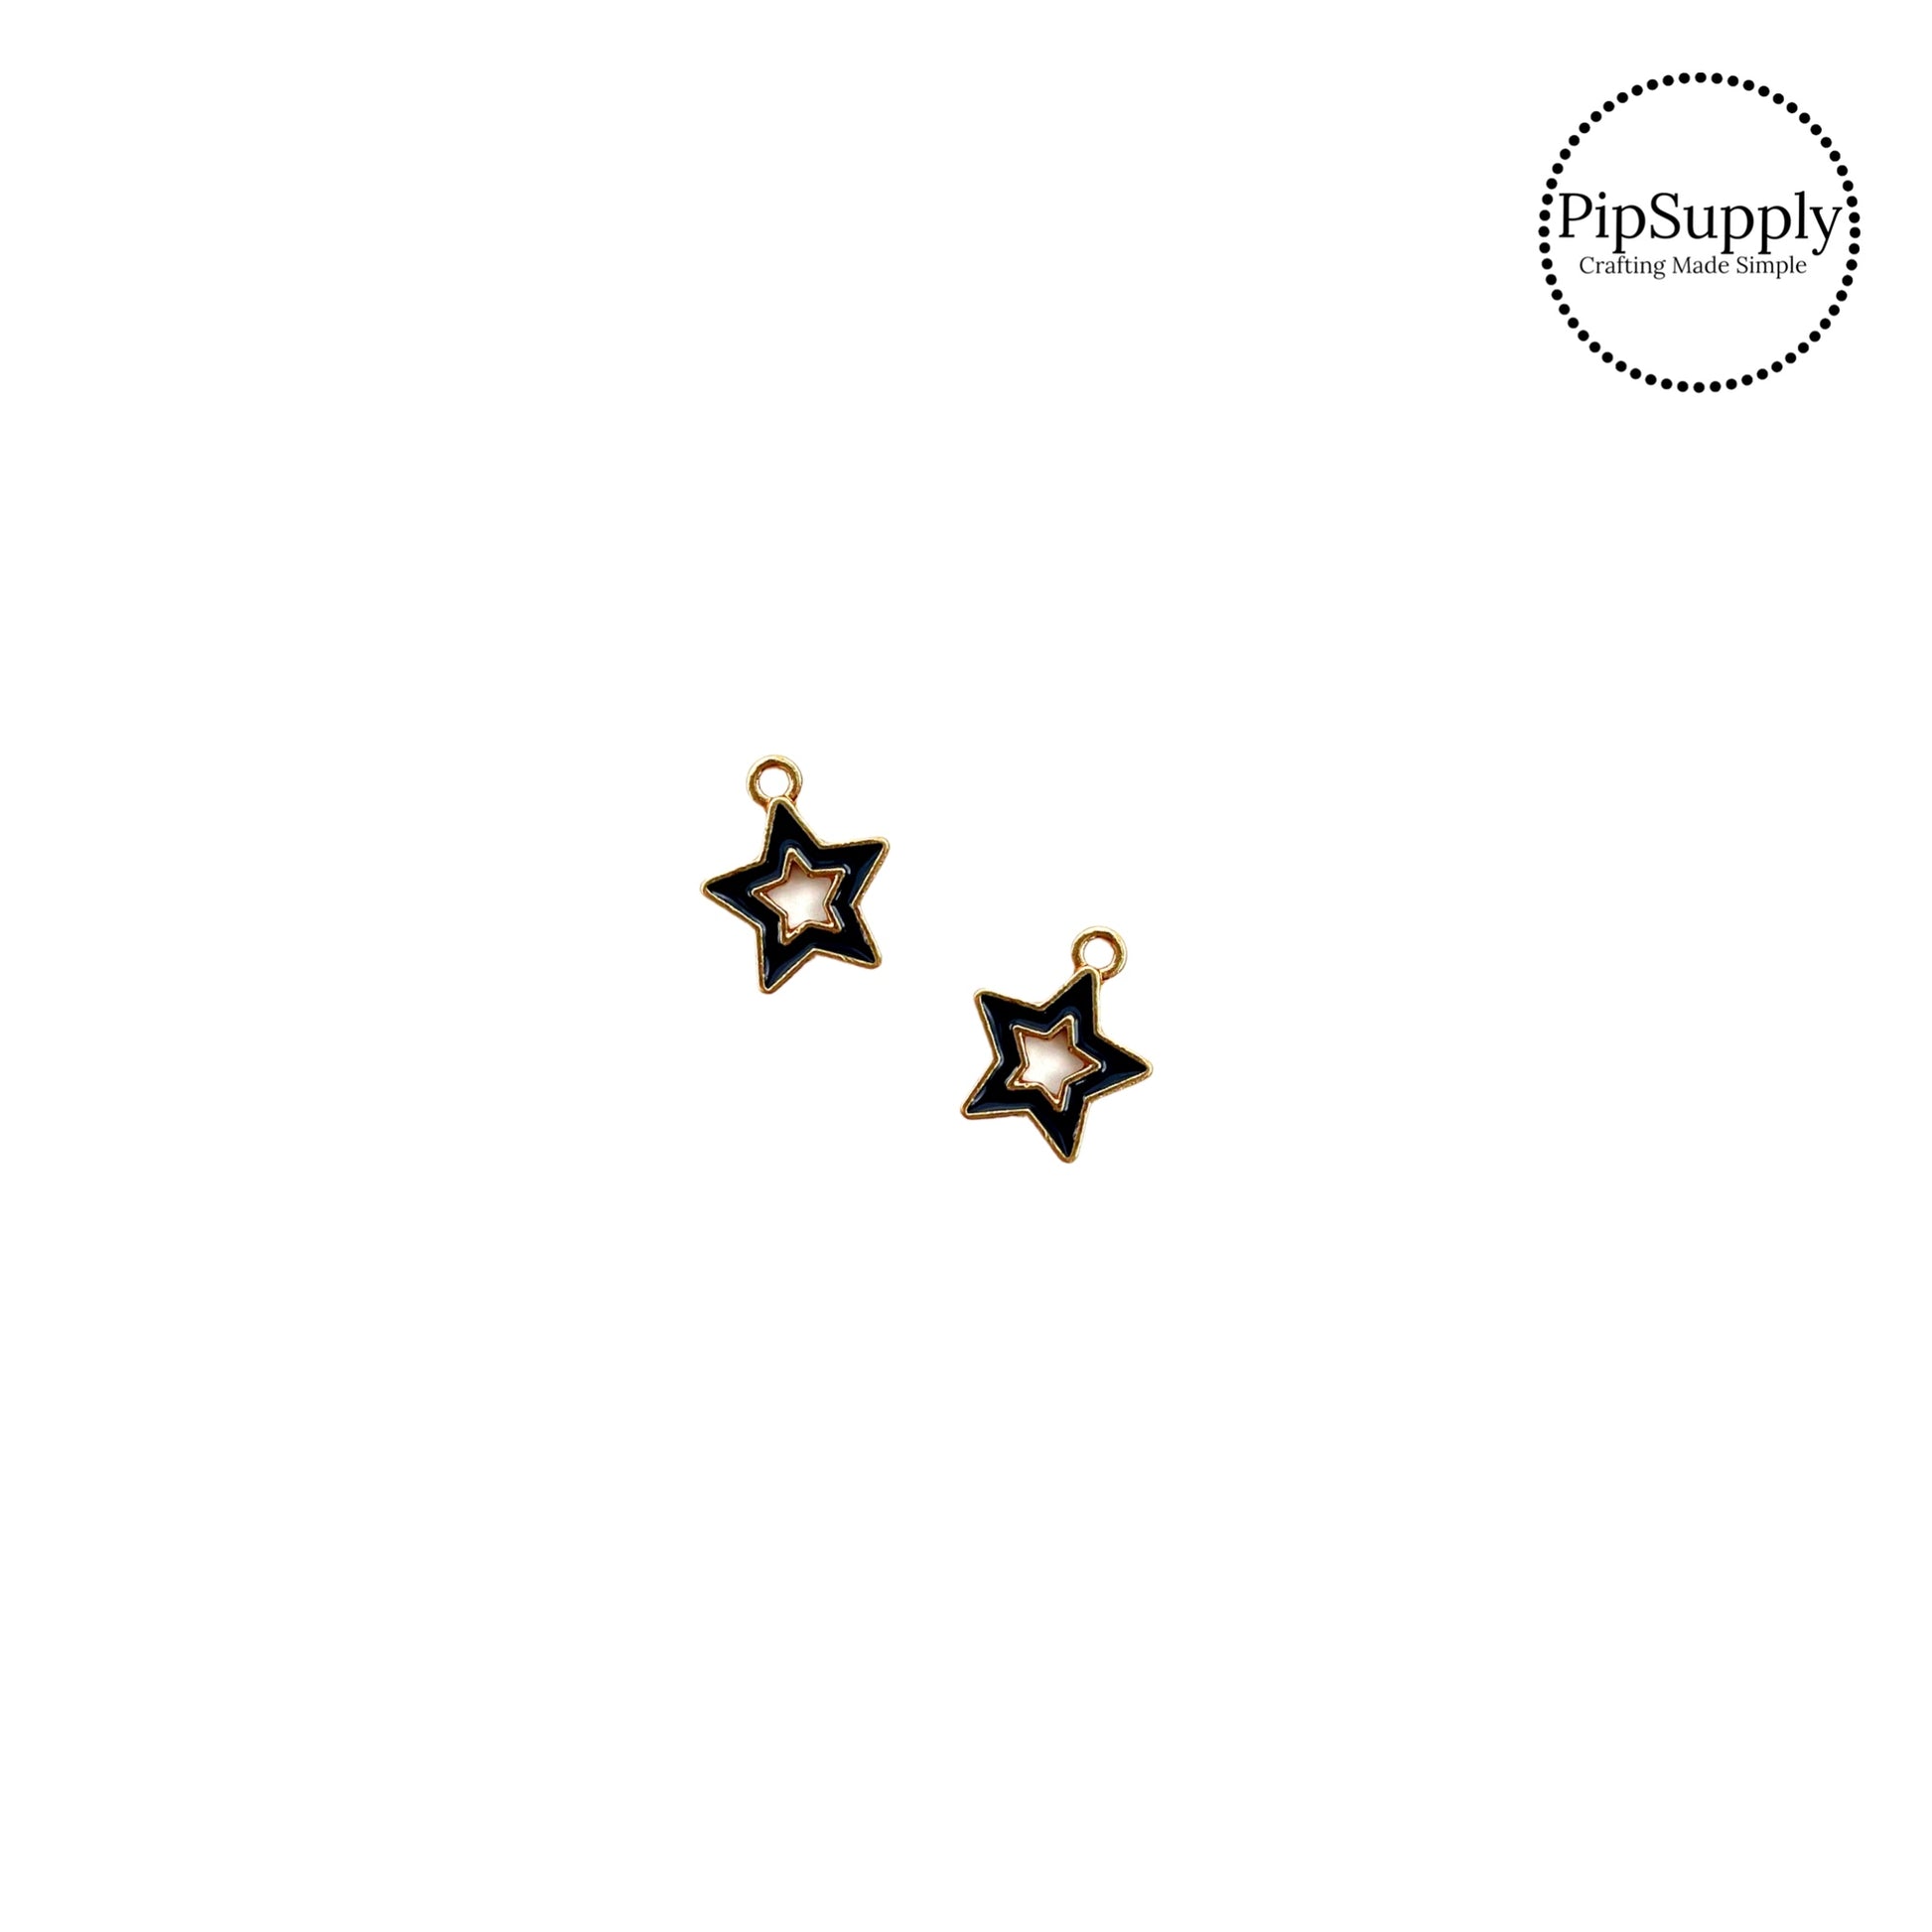 Black star outline with gold charm embellishment